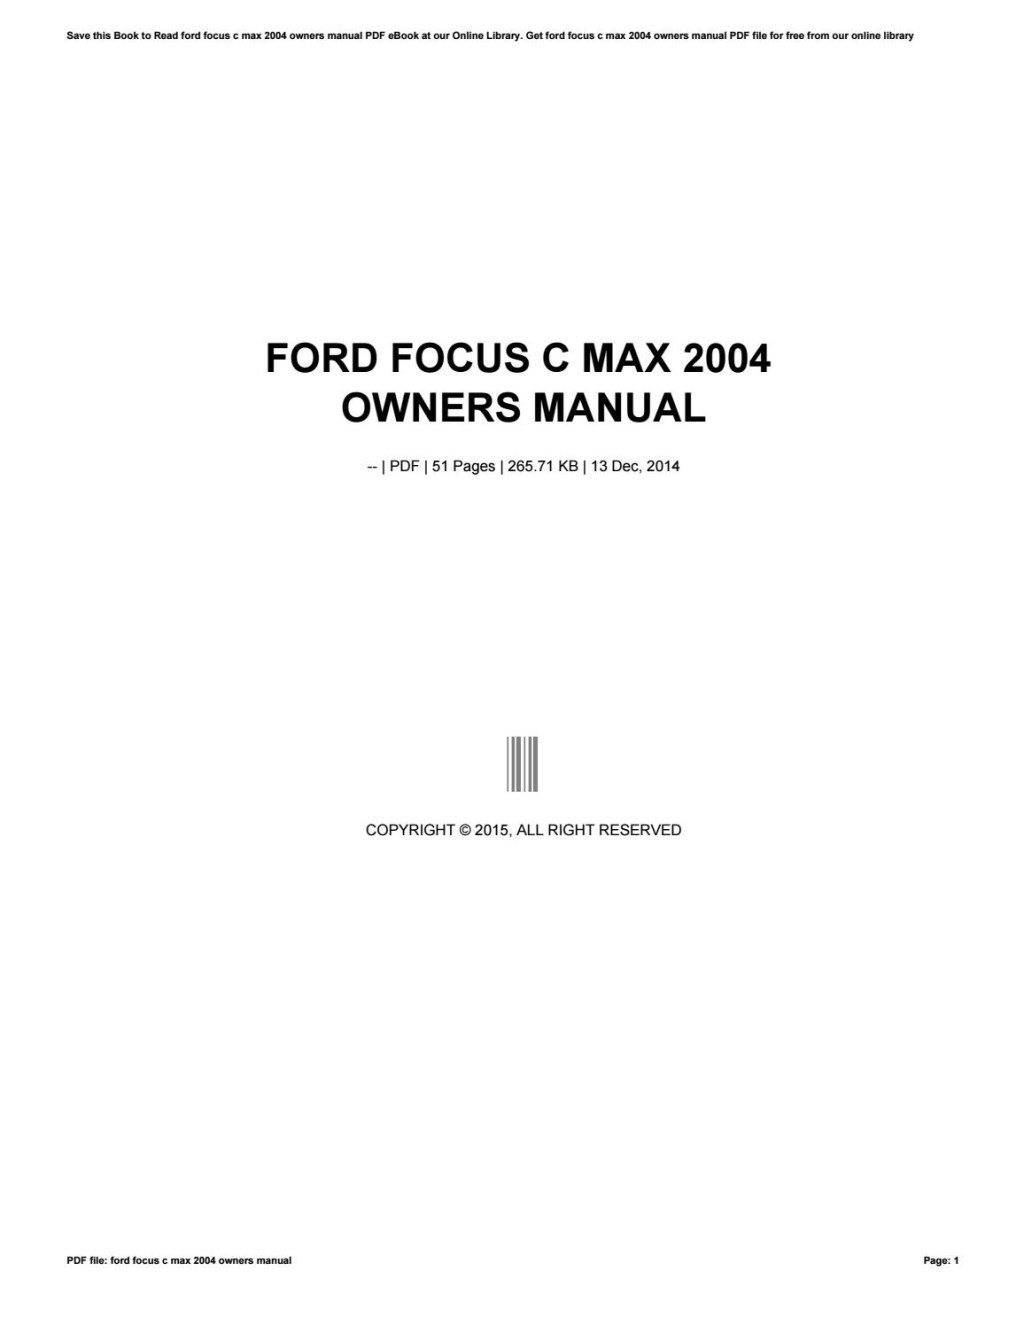 Picture of: Ford focus c max  owners manual by ziyap – Issuu